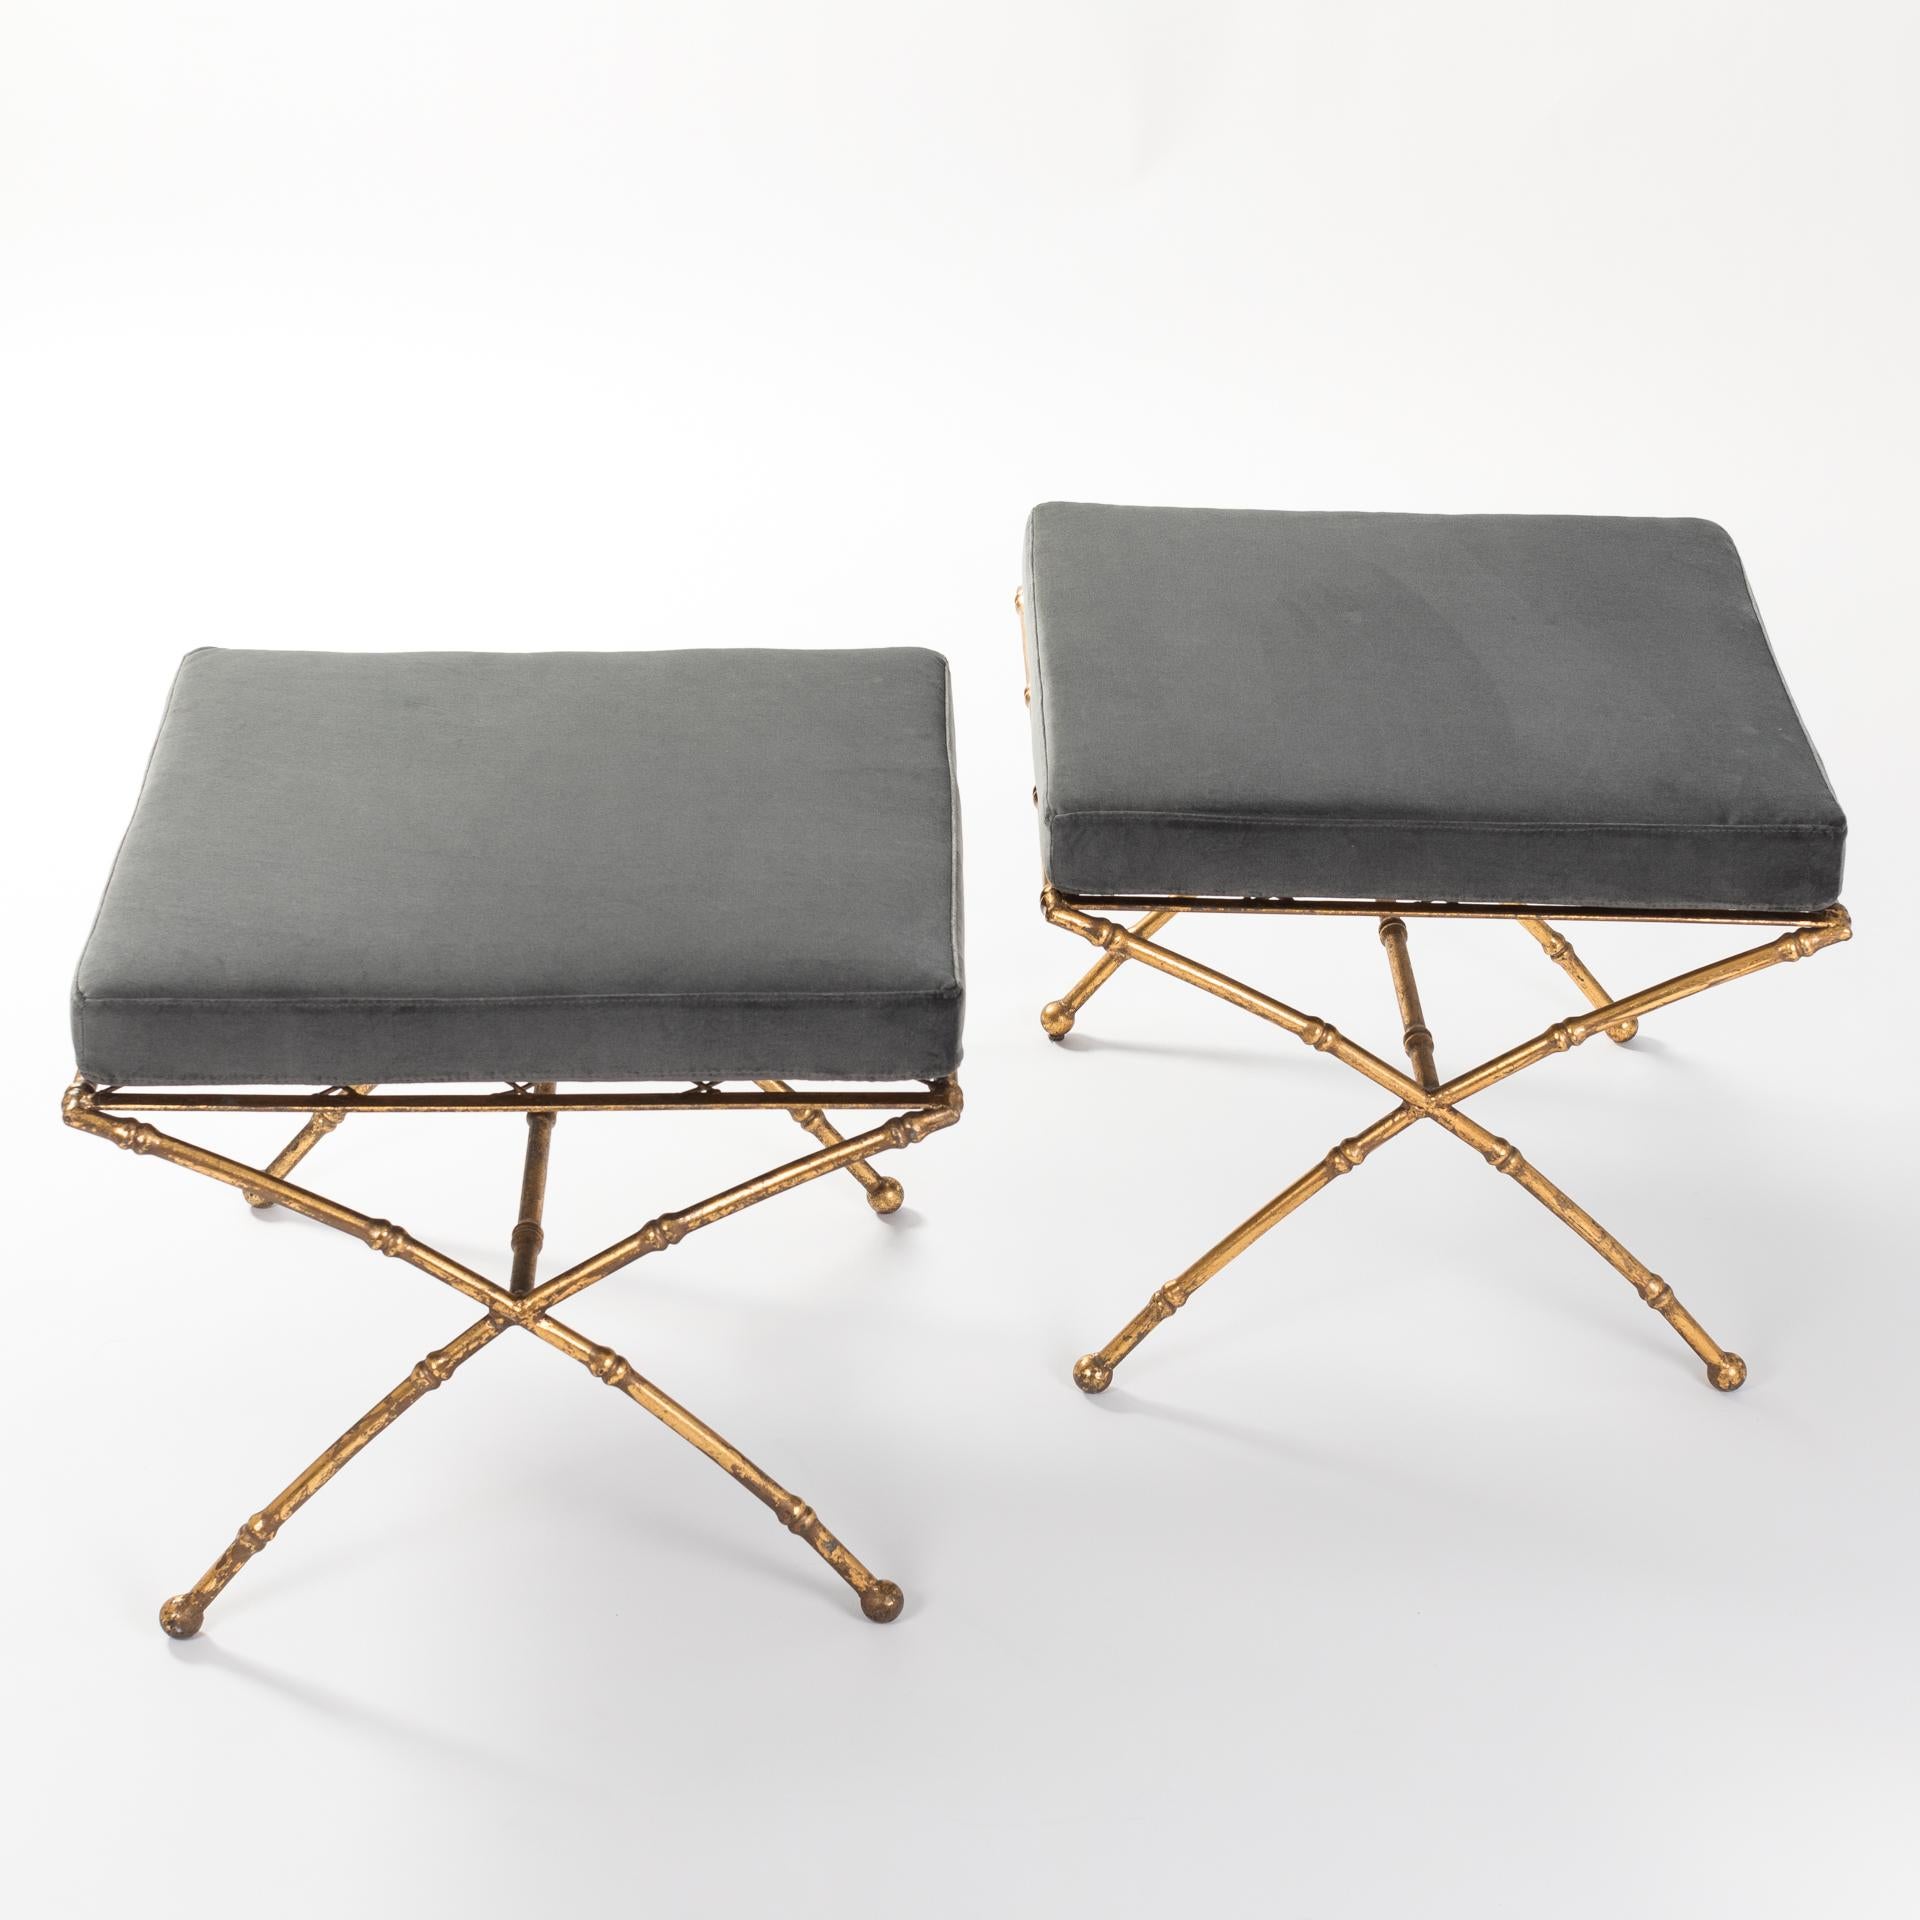 Light-footed and stylish stools in gilt iron bamboo design in the style of Maison Baguès.
The stools fuse modern neoclassical with a spare midcentury aesthetic.
The matt cotton velvet by Pierre Frey complements the golden-brown patina very well.
The